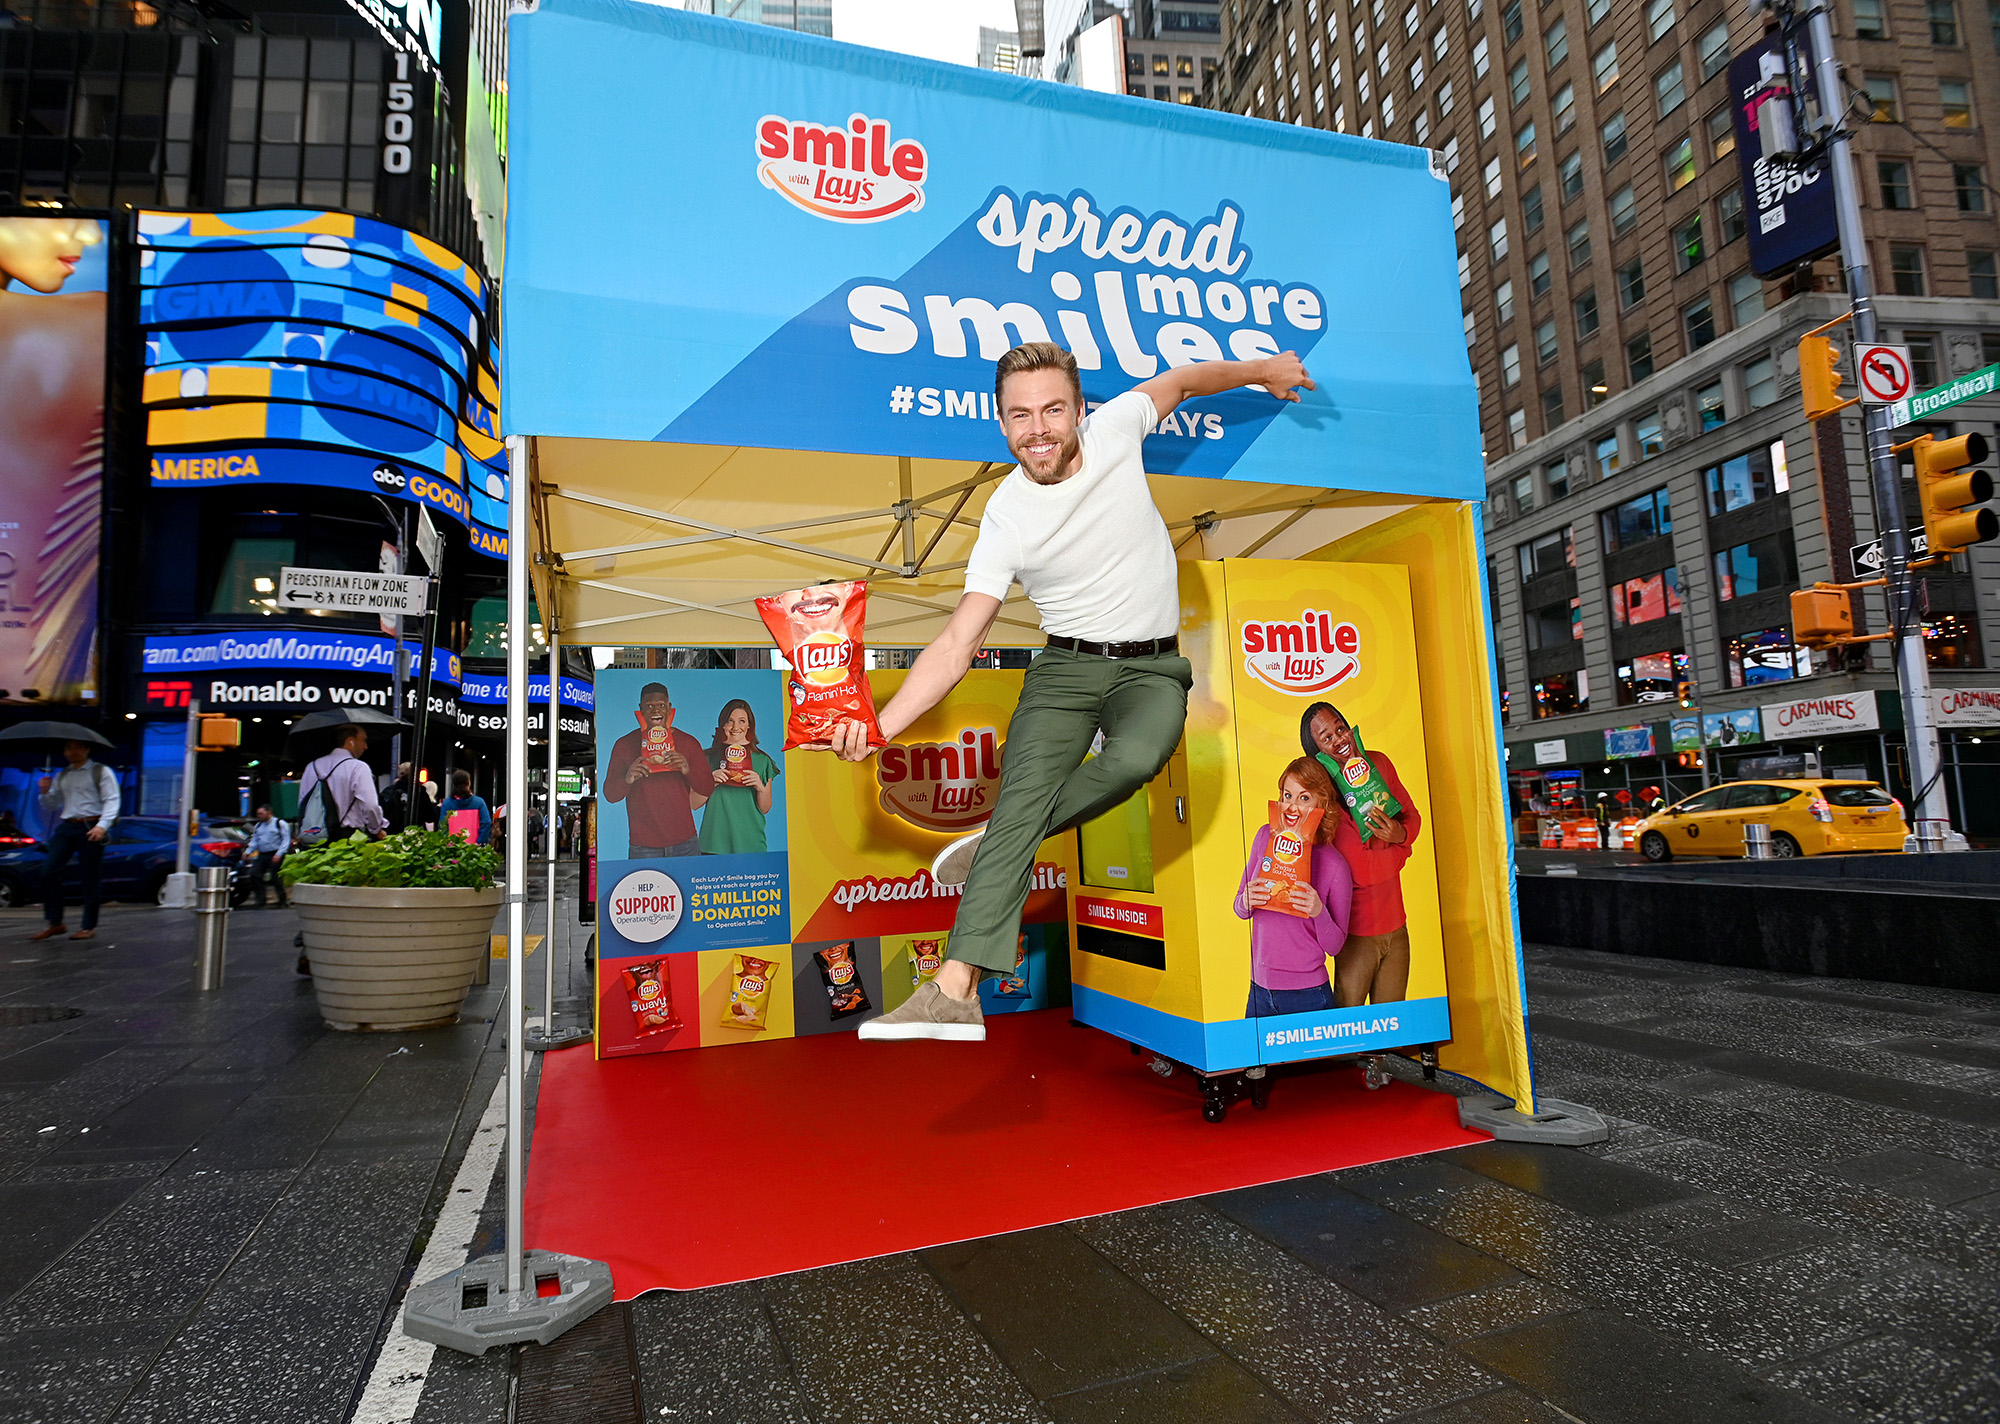 Dancer, actor and singer Derek Hough kicks off the Lay’s Smiles campaign by unveiling the first-ever Smiles Station in Times Square, New York City, on July 23, 2019. The station dispenses Lay’s limited-edition bags to passerby featuring real people’s stories and smiles aimed at helping raise $1 million to Operation Smile.